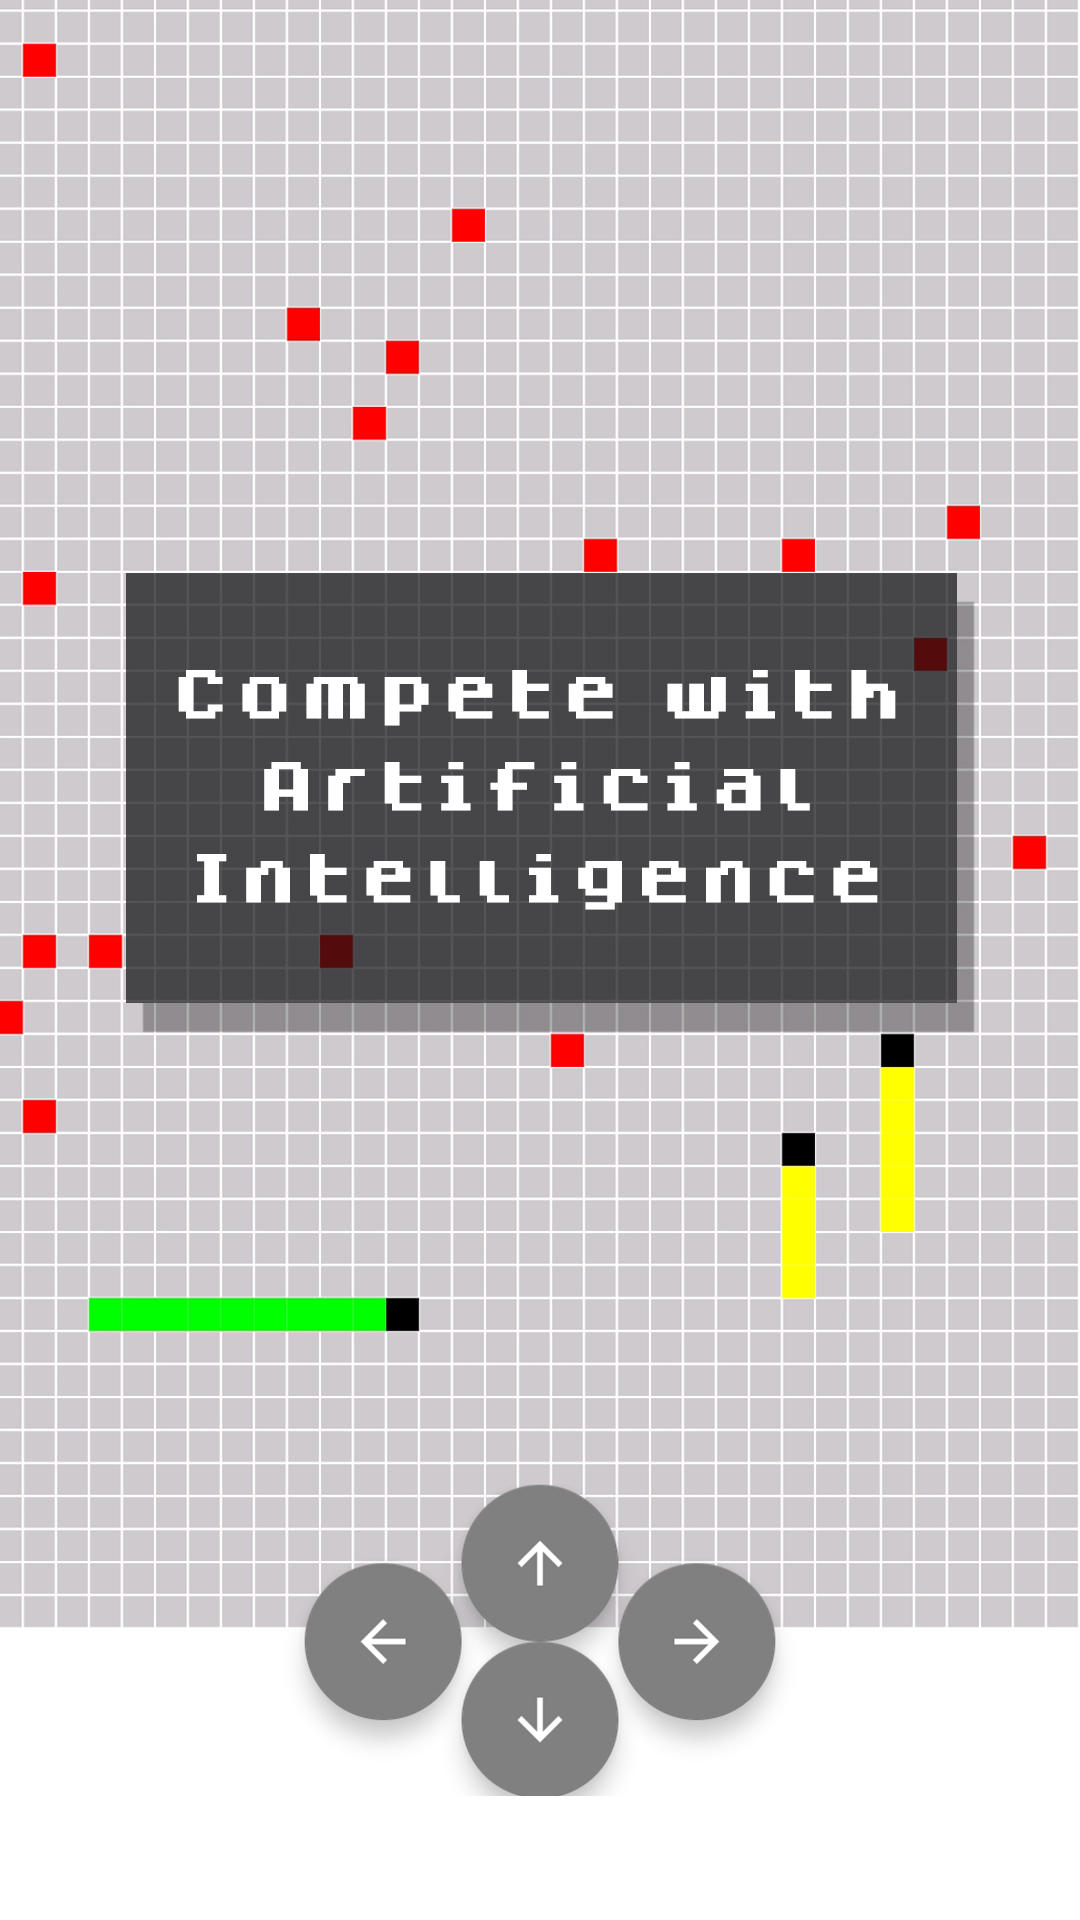 Classic Snake Game::Appstore for Android